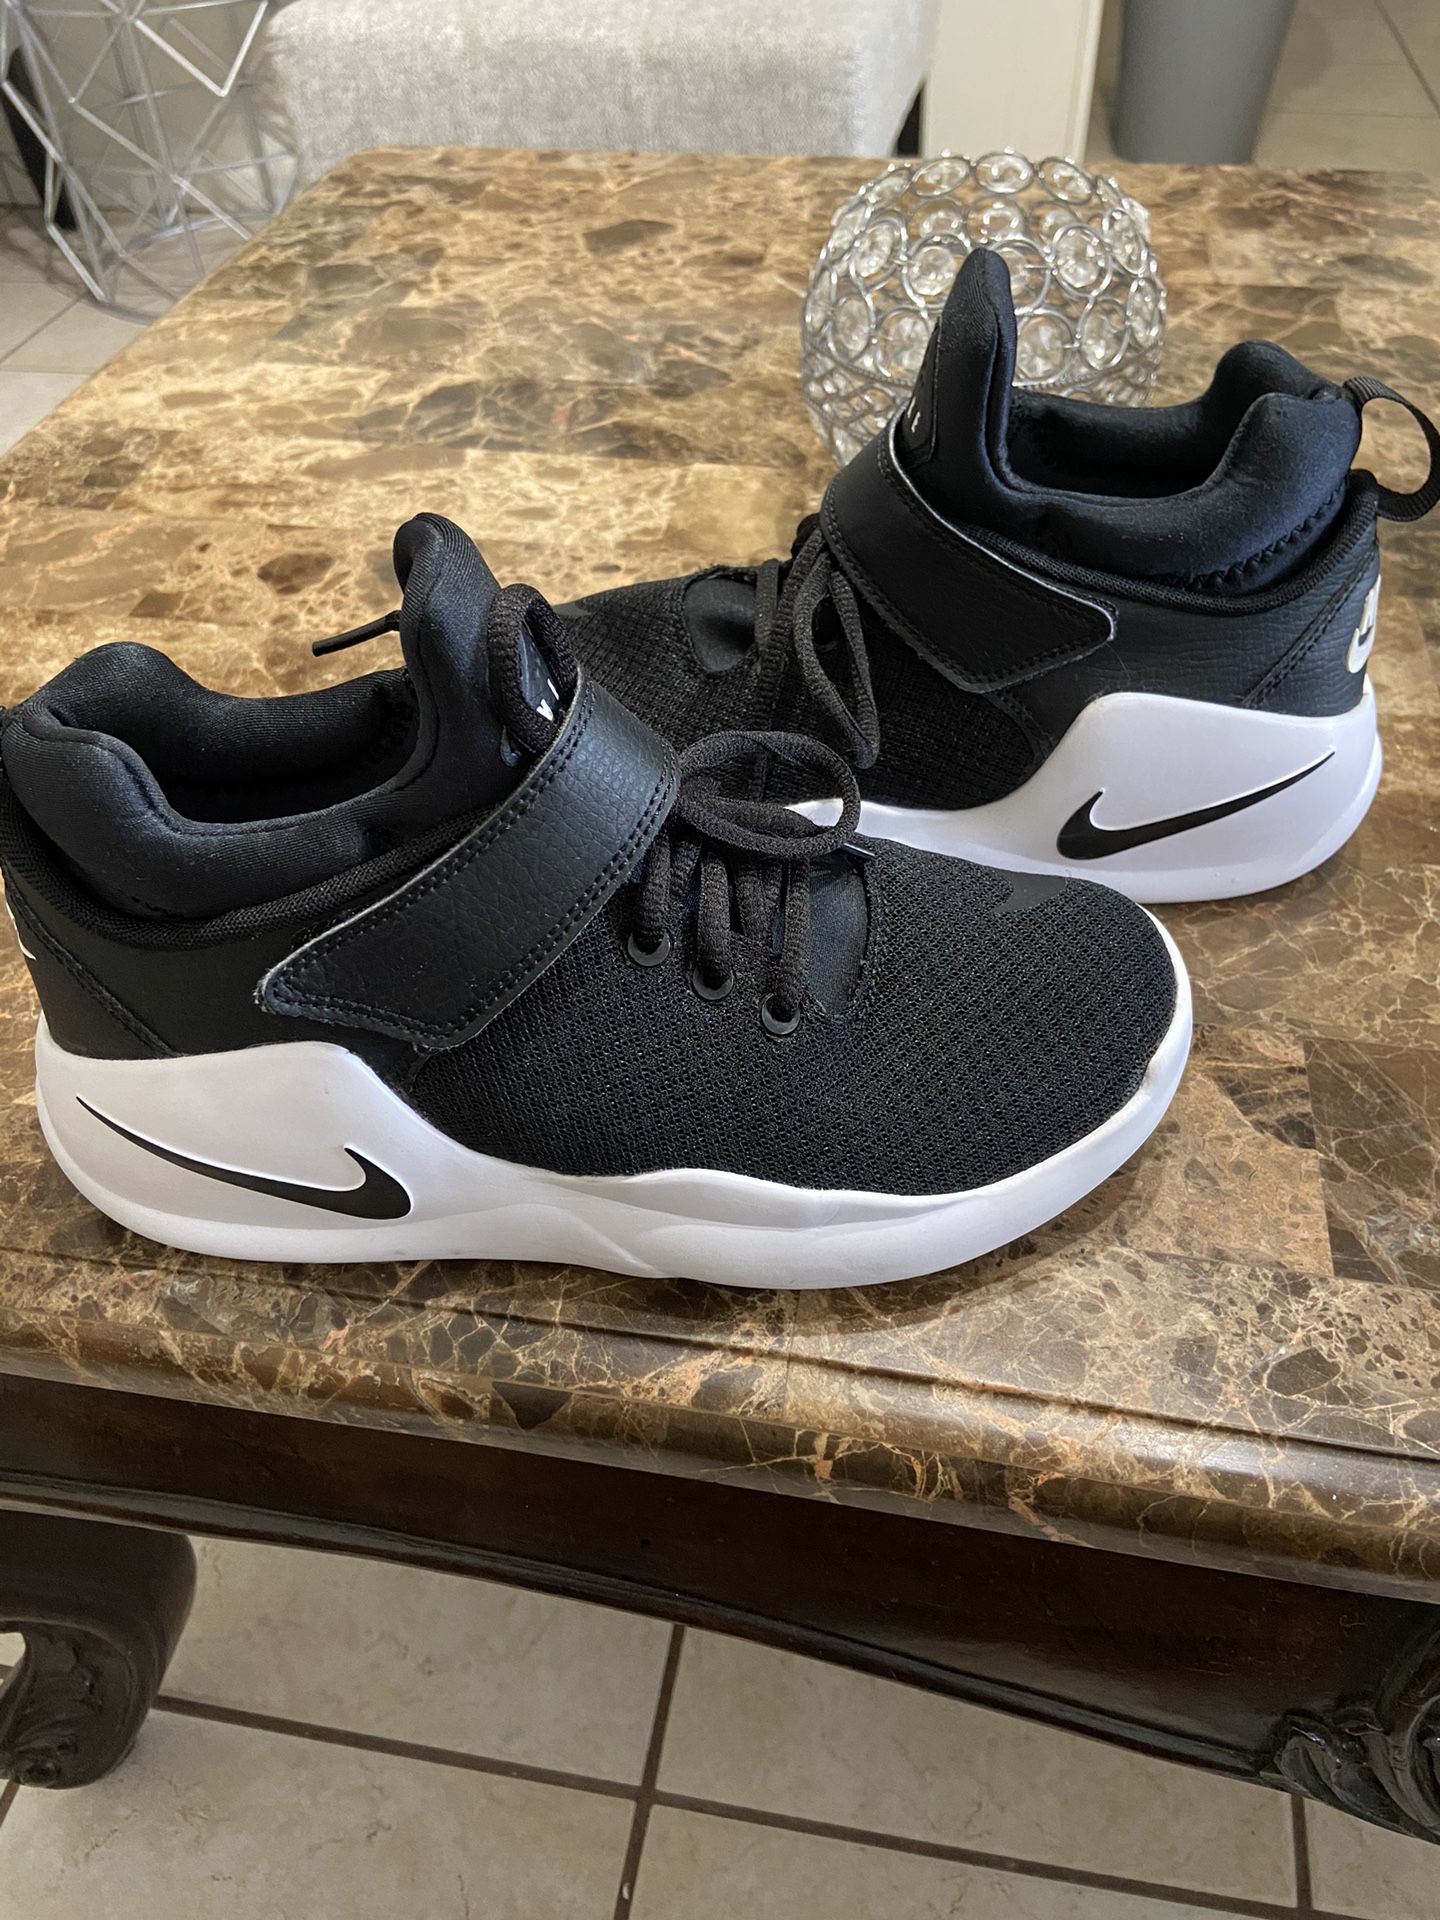 Kids Nike basketball shoes size 4.5y